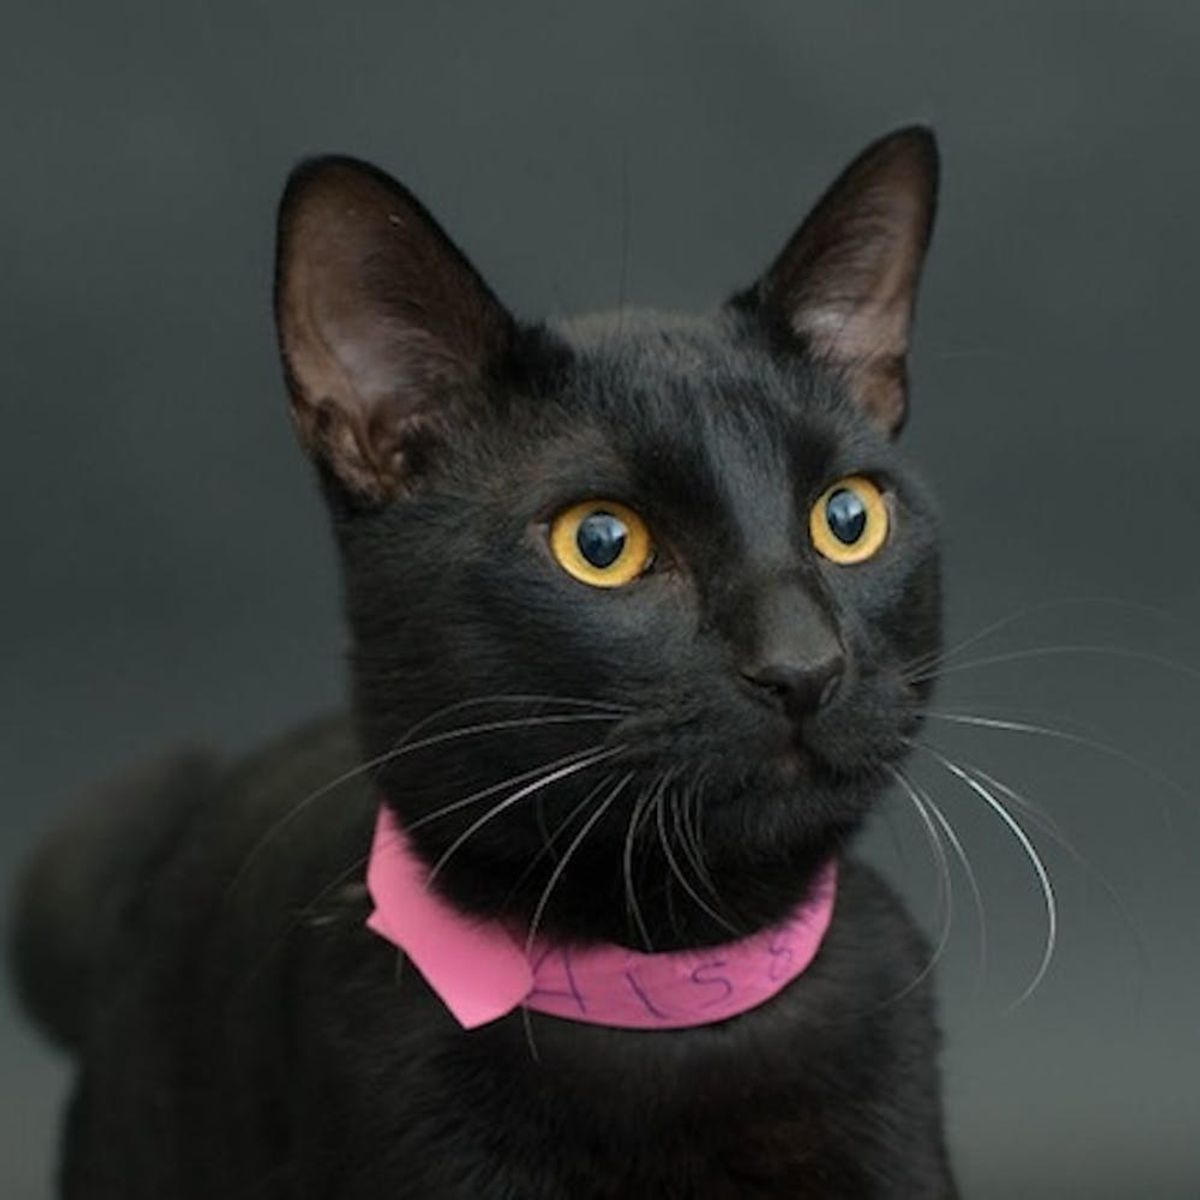 This Adorable Photo Series Wants to Change the Way You See Black Cats